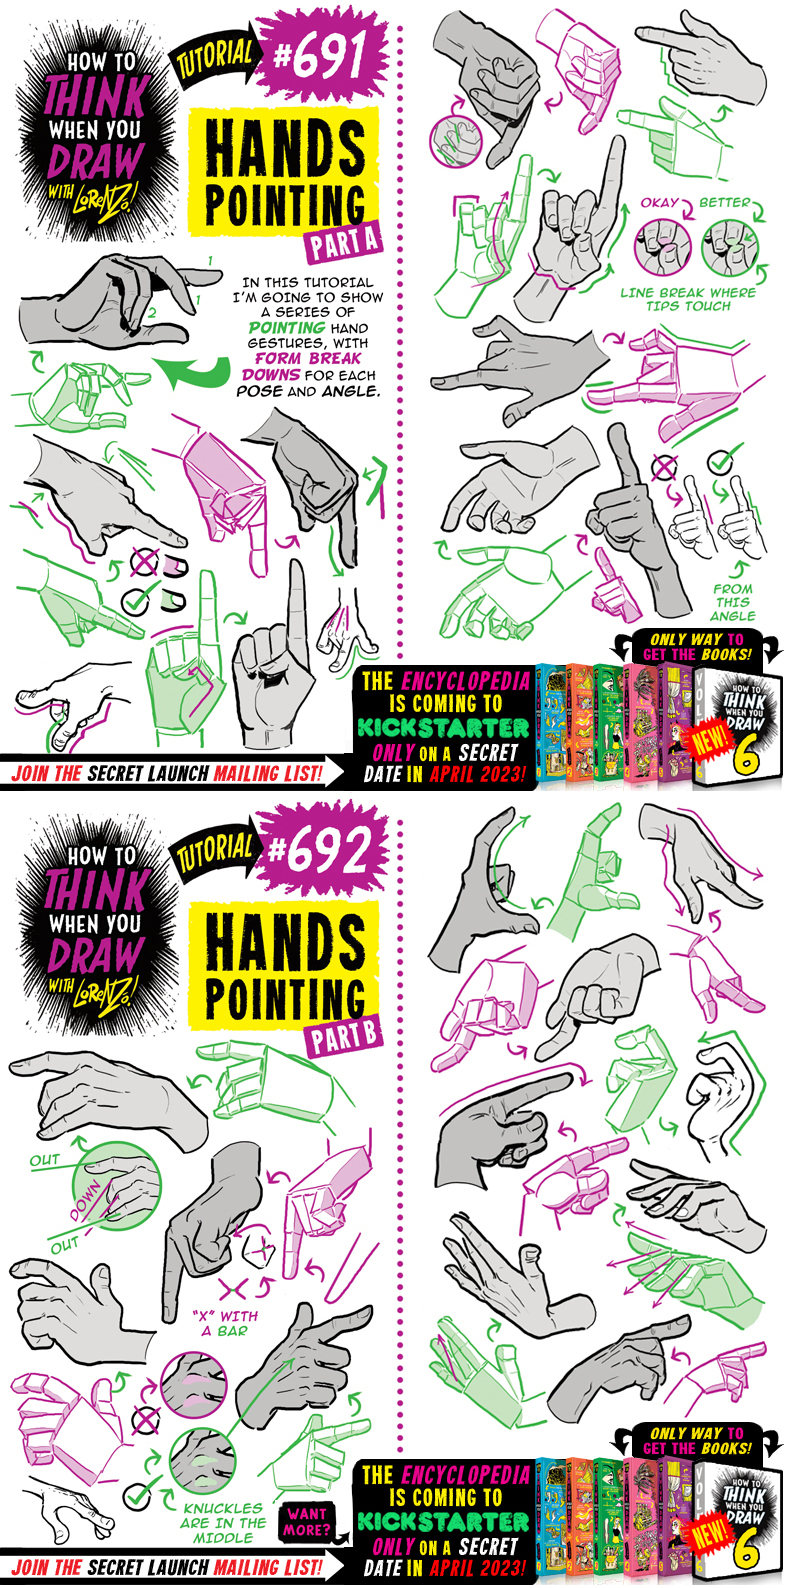 How to Draw Thing (Hand) from the TV Series Wednesday